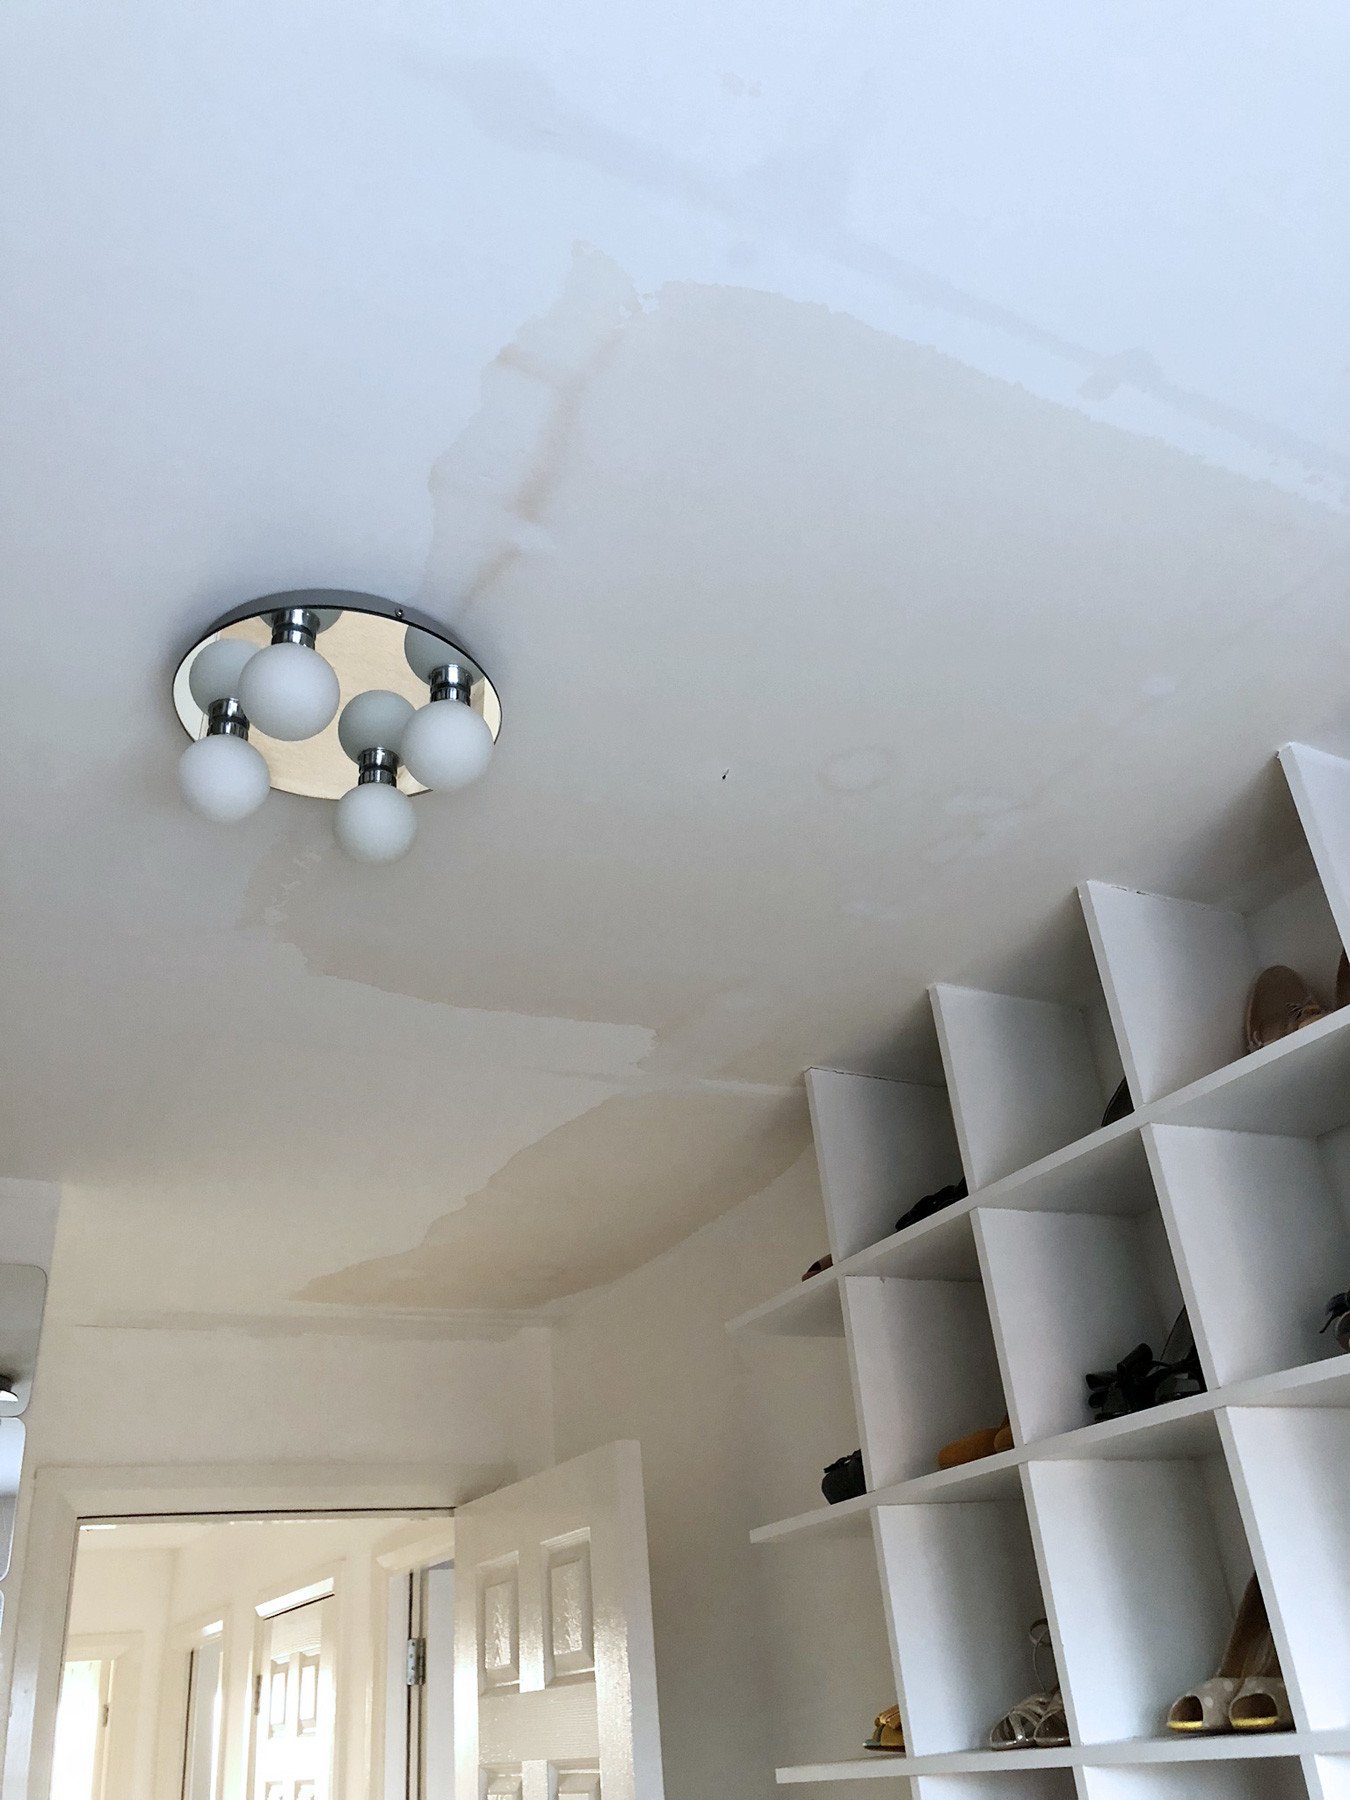 water damage on flooded ceiling